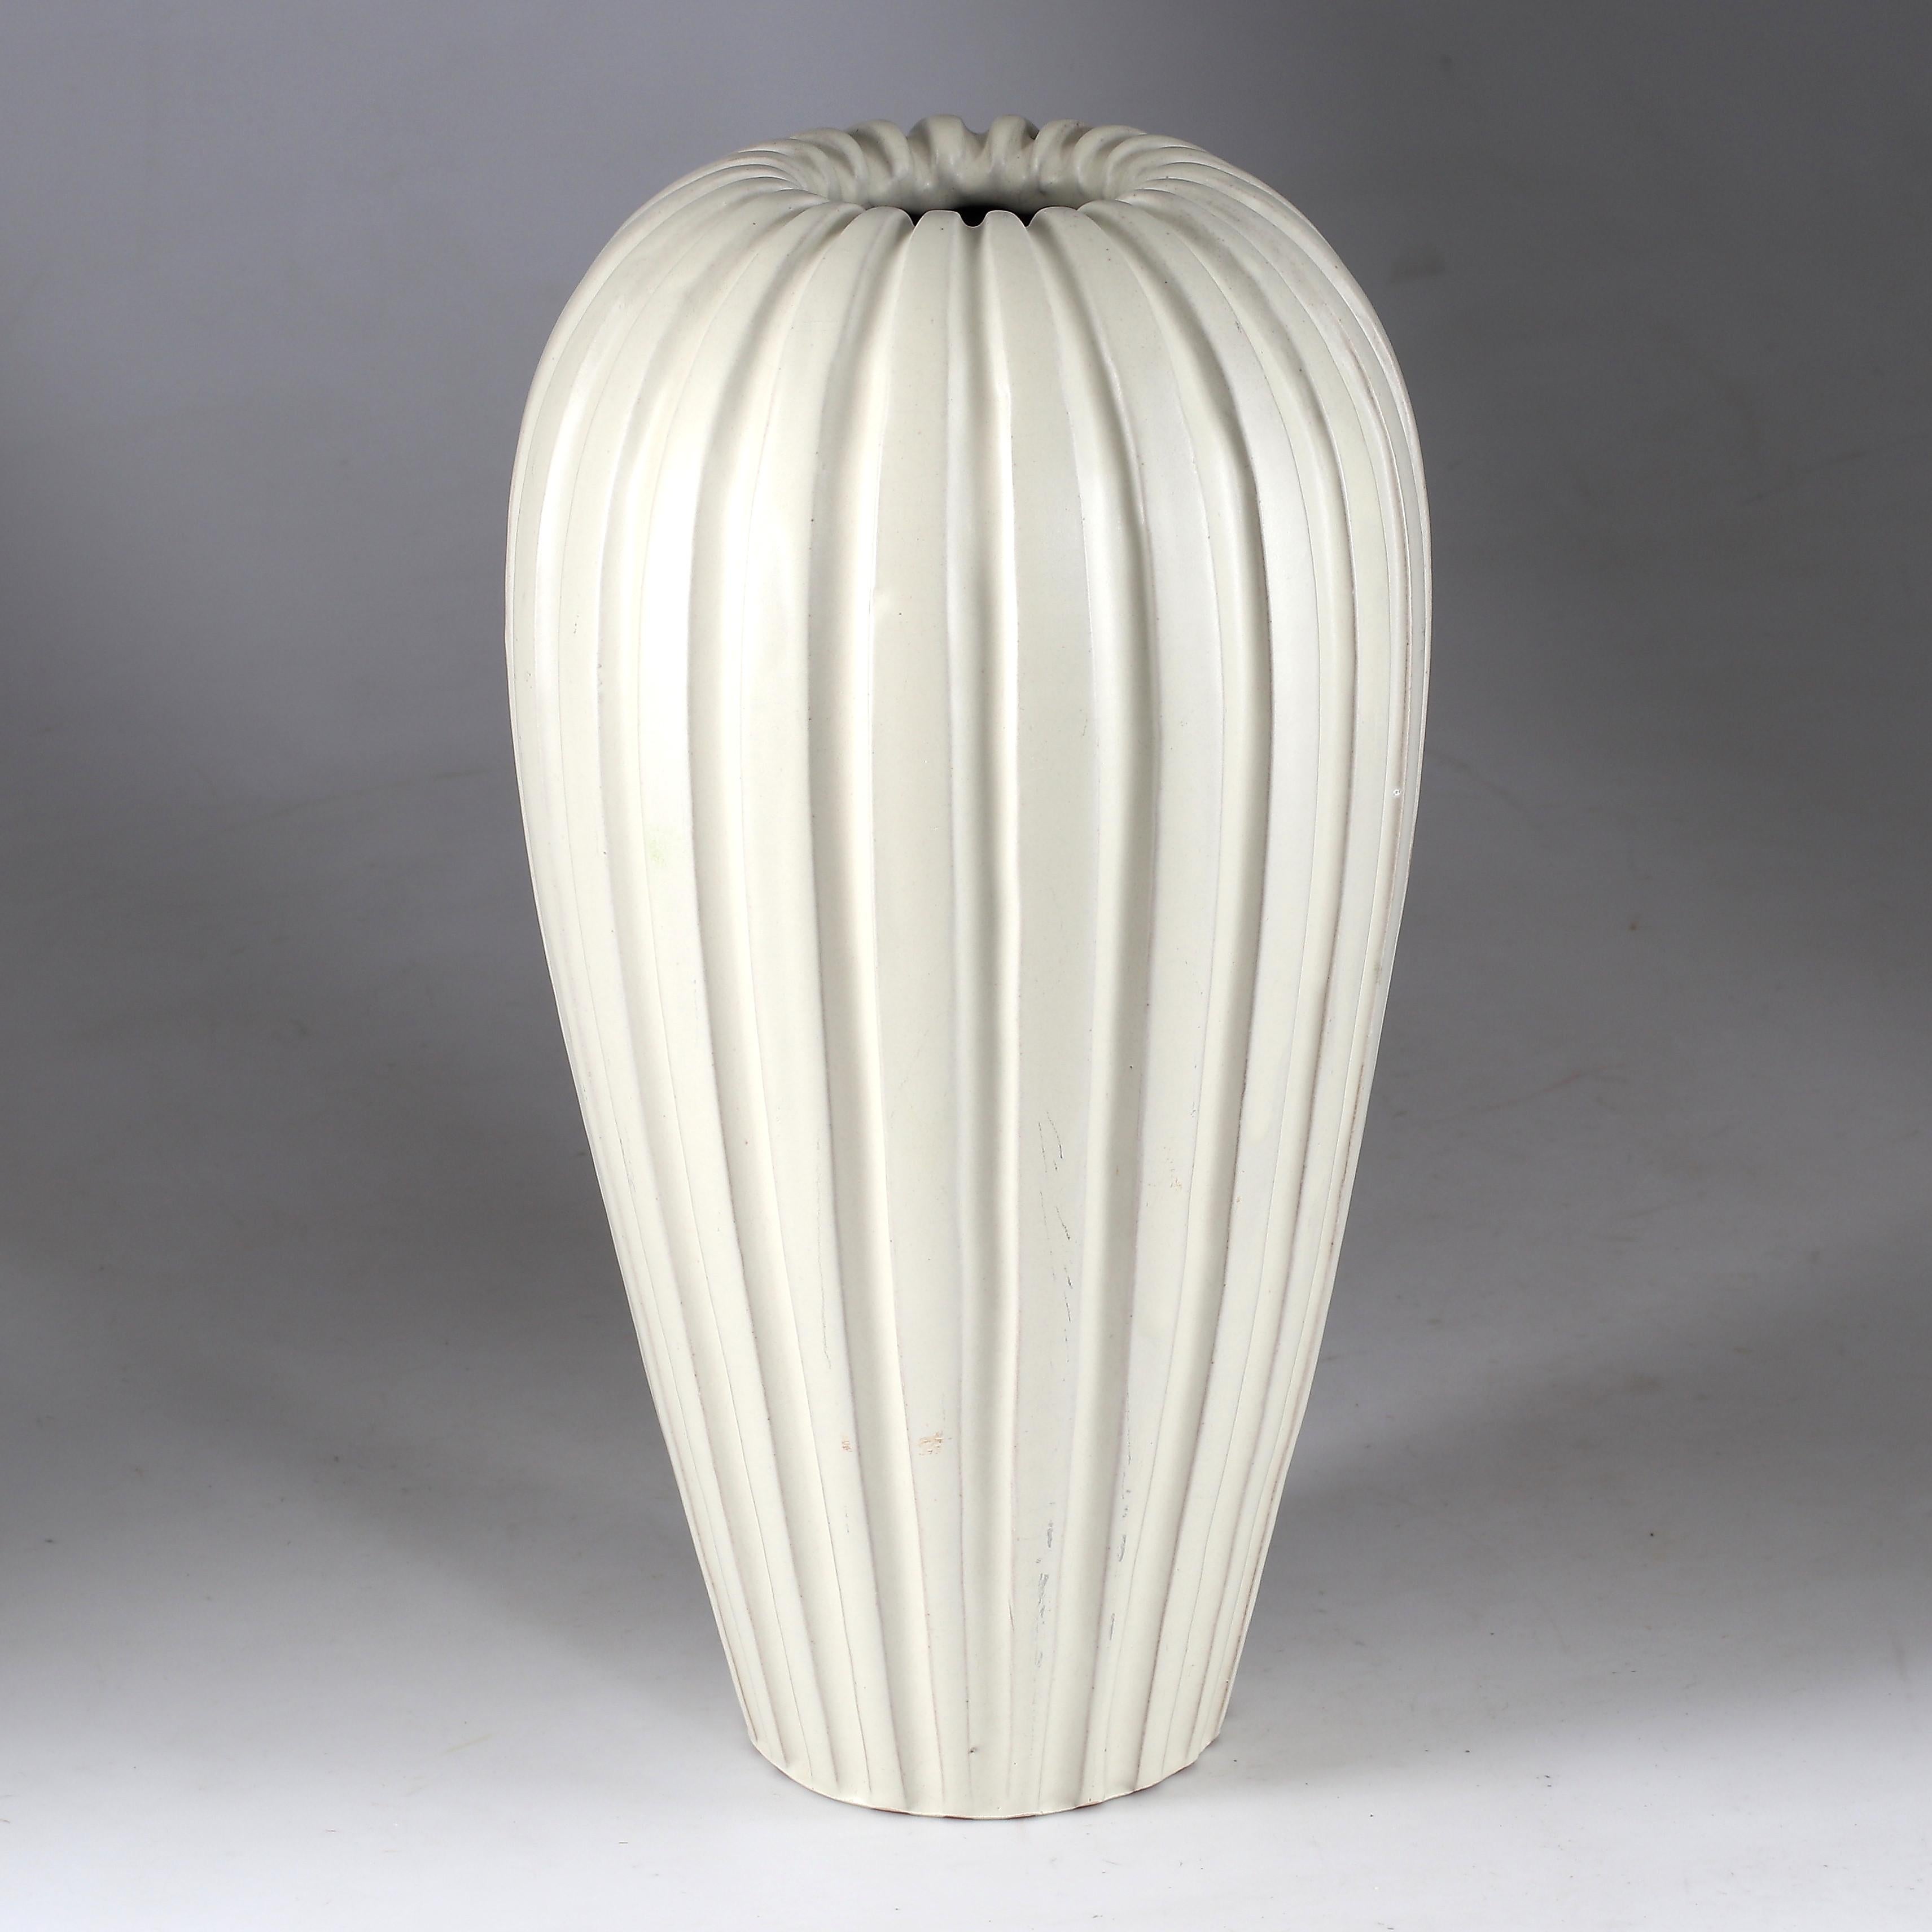 An early modernist earthenware vase. Designed by Vicke Lindstrand, for Upsala-Ekeby, Sweden, 1940s.

Upsala-Ekeby AB was a porcelain, tile, brick, and glass company founded in 1886 in Uppsala, Sweden. Other designers of the period include Ettore